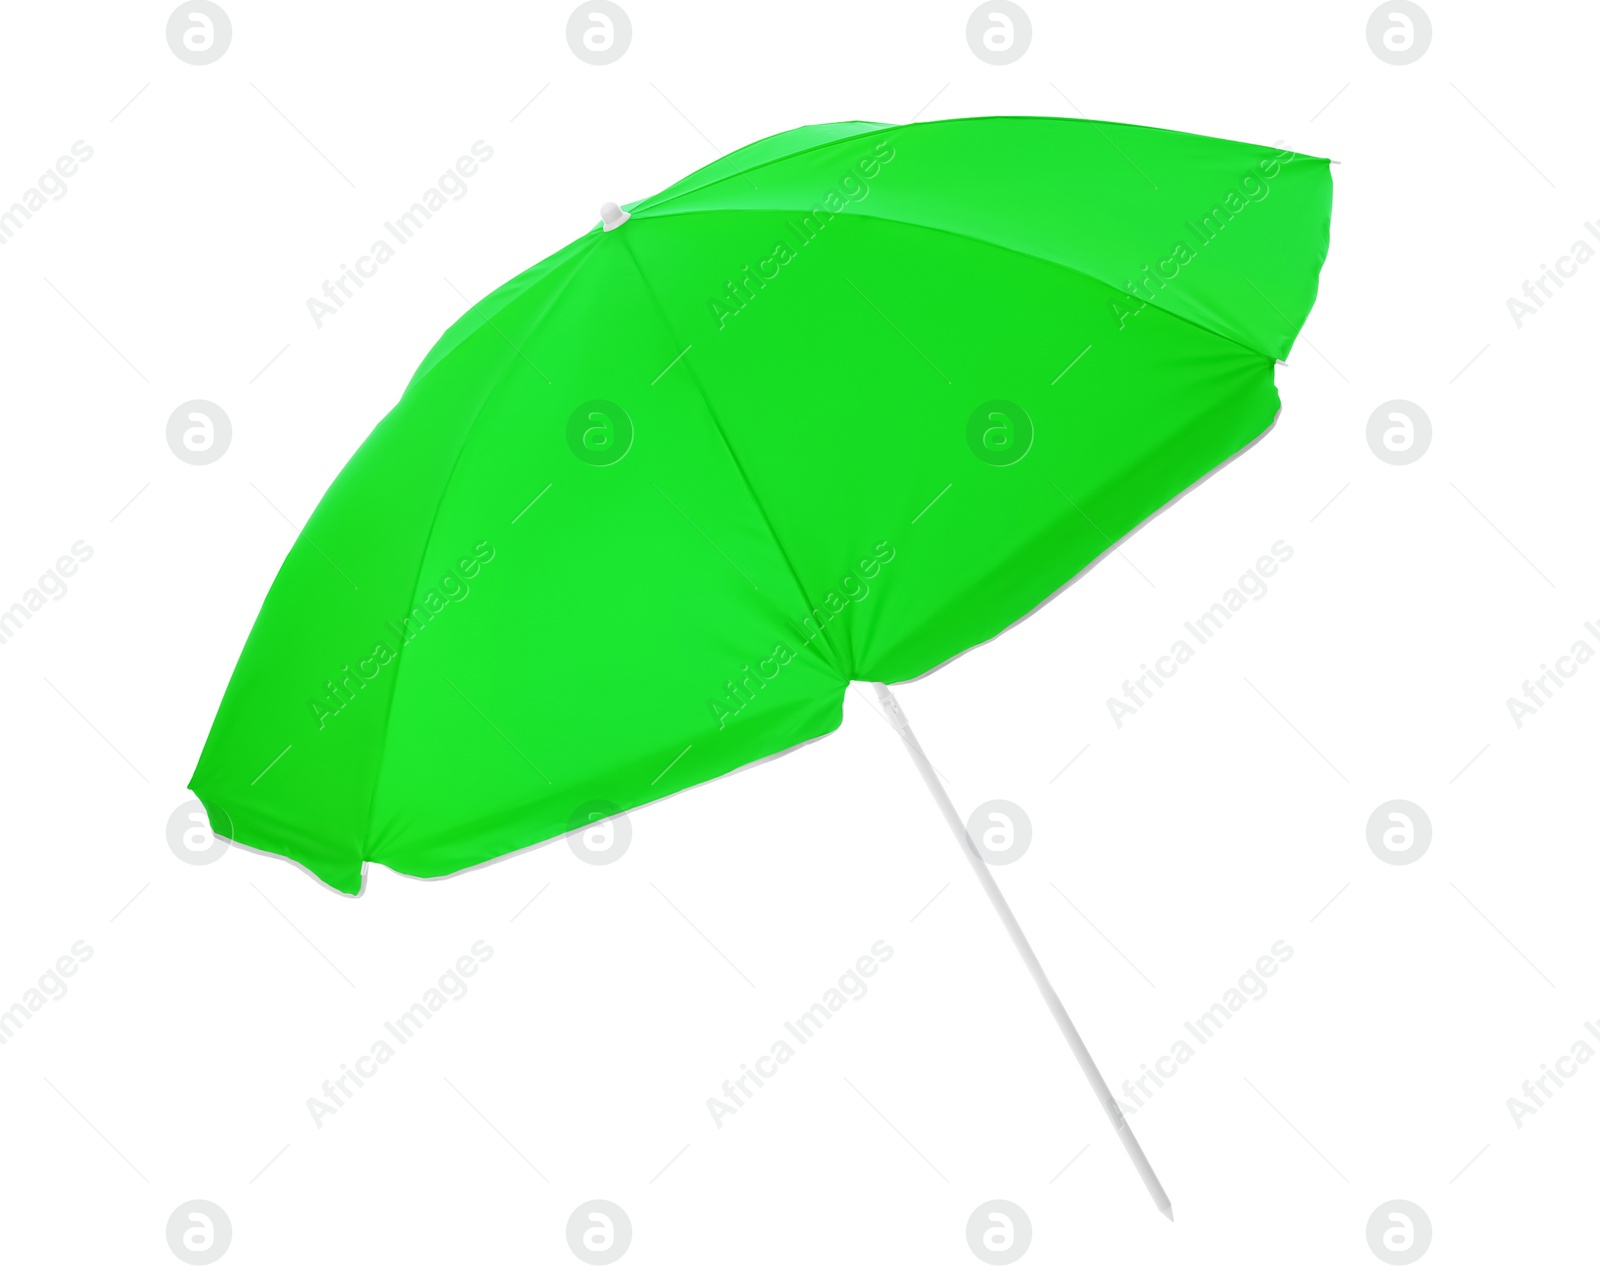 Image of Open green beach umbrella isolated on white